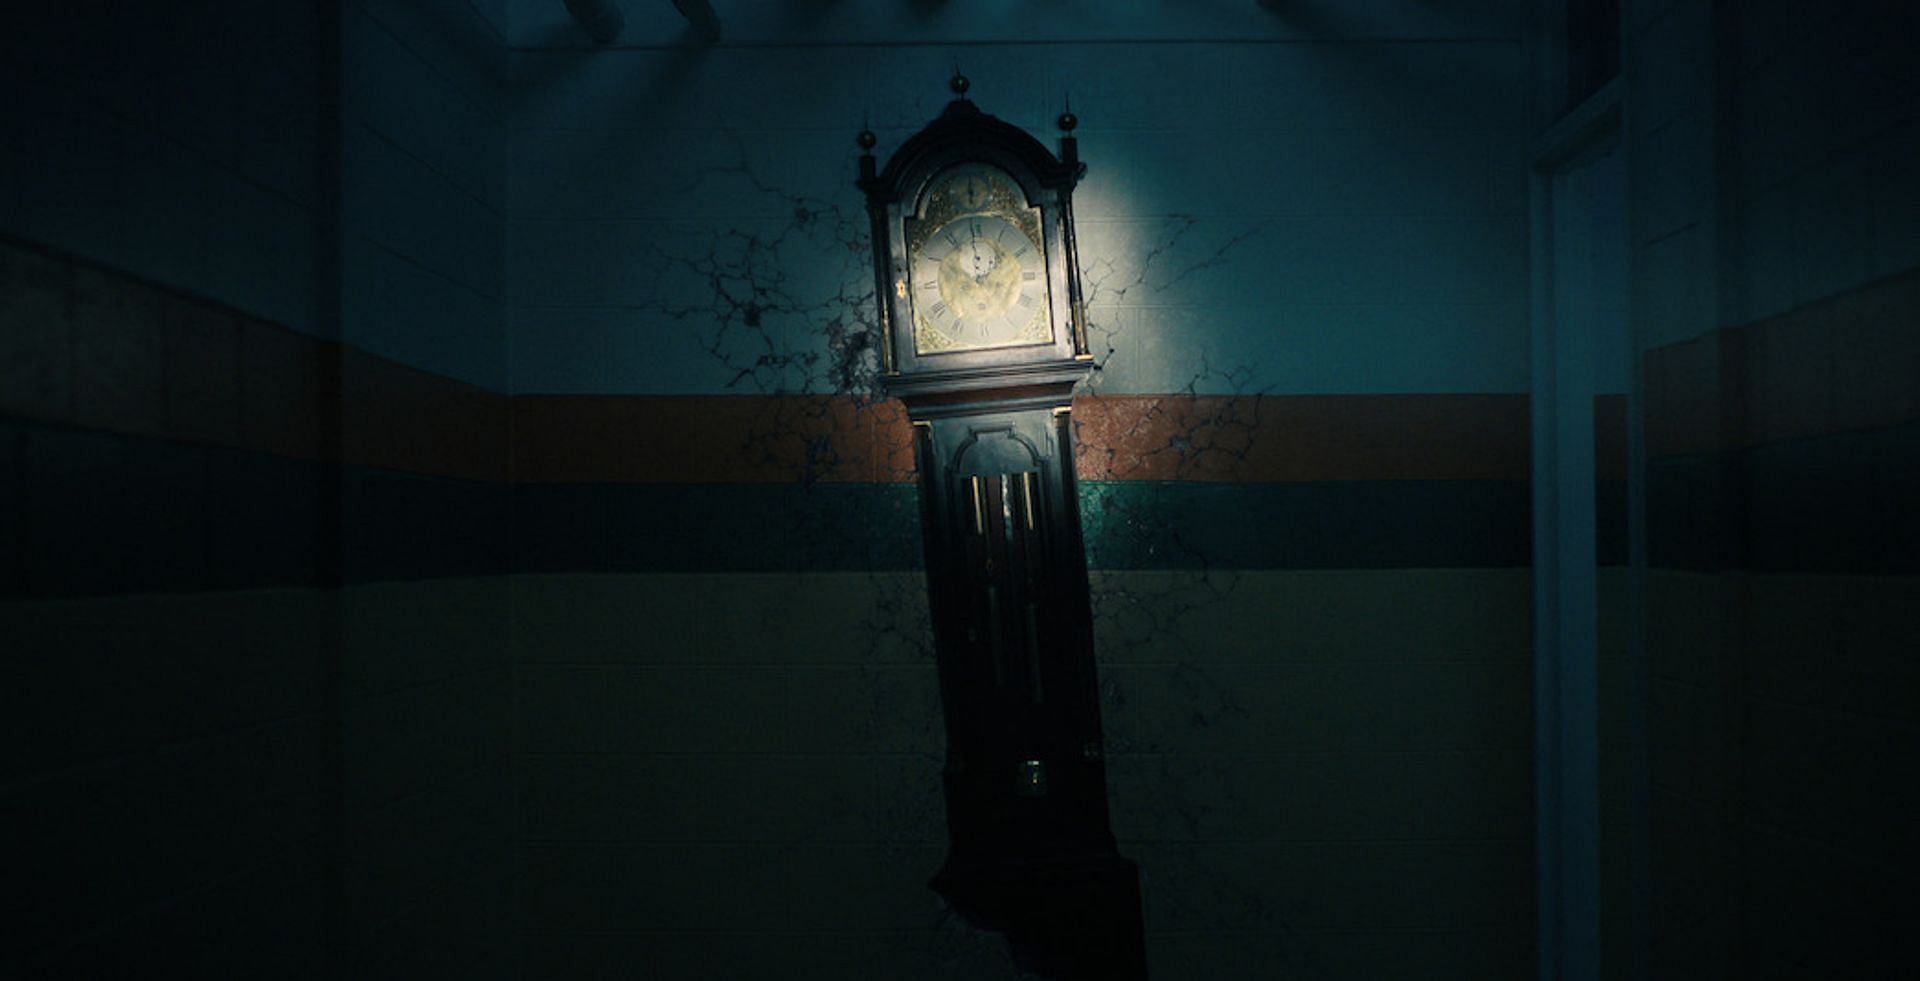 TikTokers are going gaga over the Stranger Things-inspired Grandfather Clock trend (Image via Netflix)